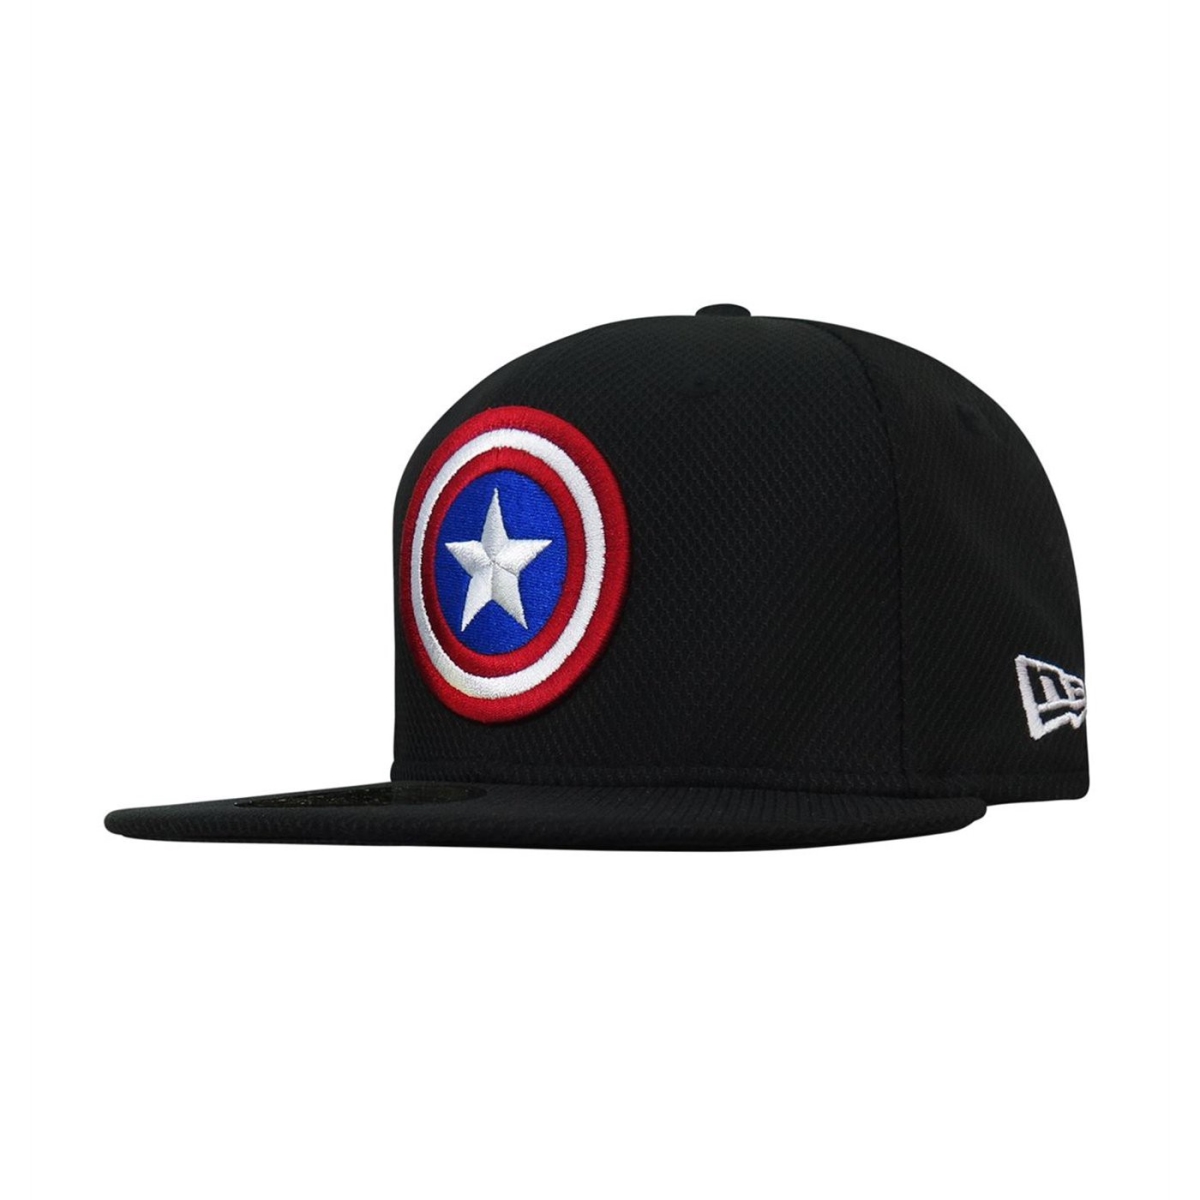 Picture of Captain America hatcapshldsym5950-712-7 1-2 Fitted Captain America Shield Black 59Fifty Fitted Hat - Size 7.5